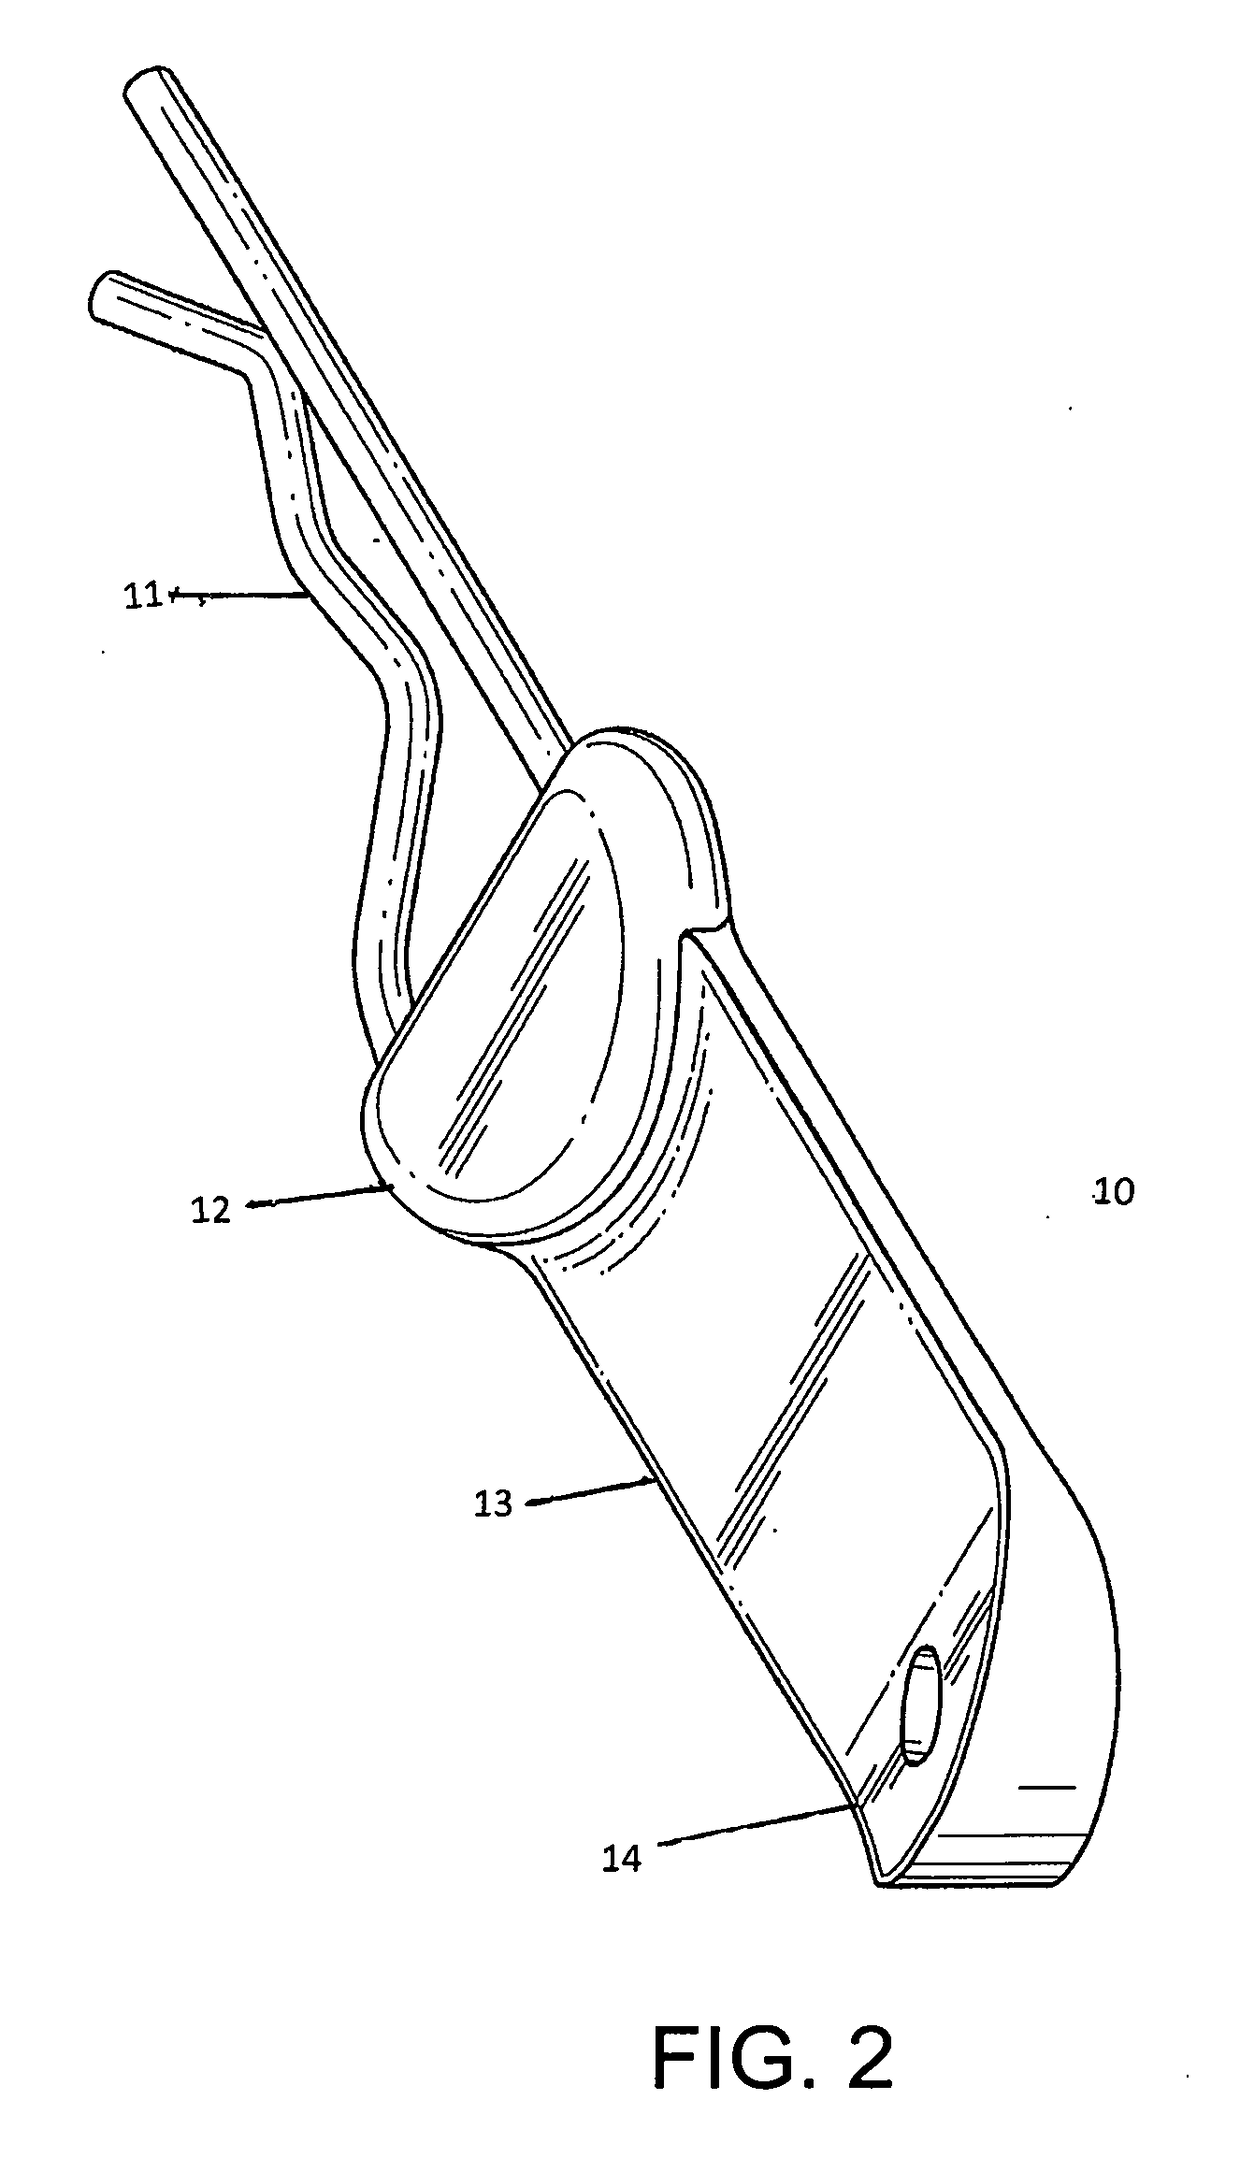 Cotter Pin Assist Device